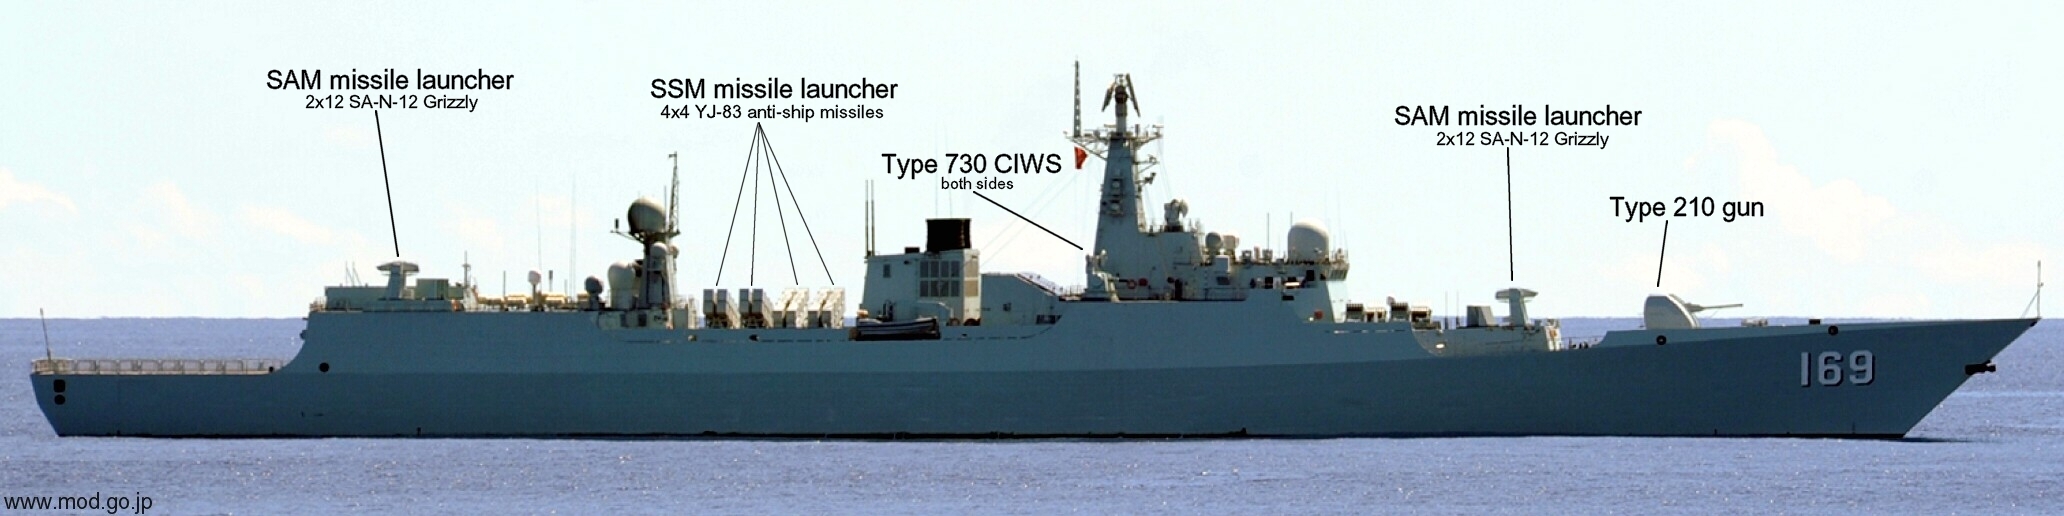 type 052b luyang-i class guided missile destroyer ddg sa-n-12 grizzly sam yj-83 ssm type-730 ciws torpedo gun china people's liberation army navy 02